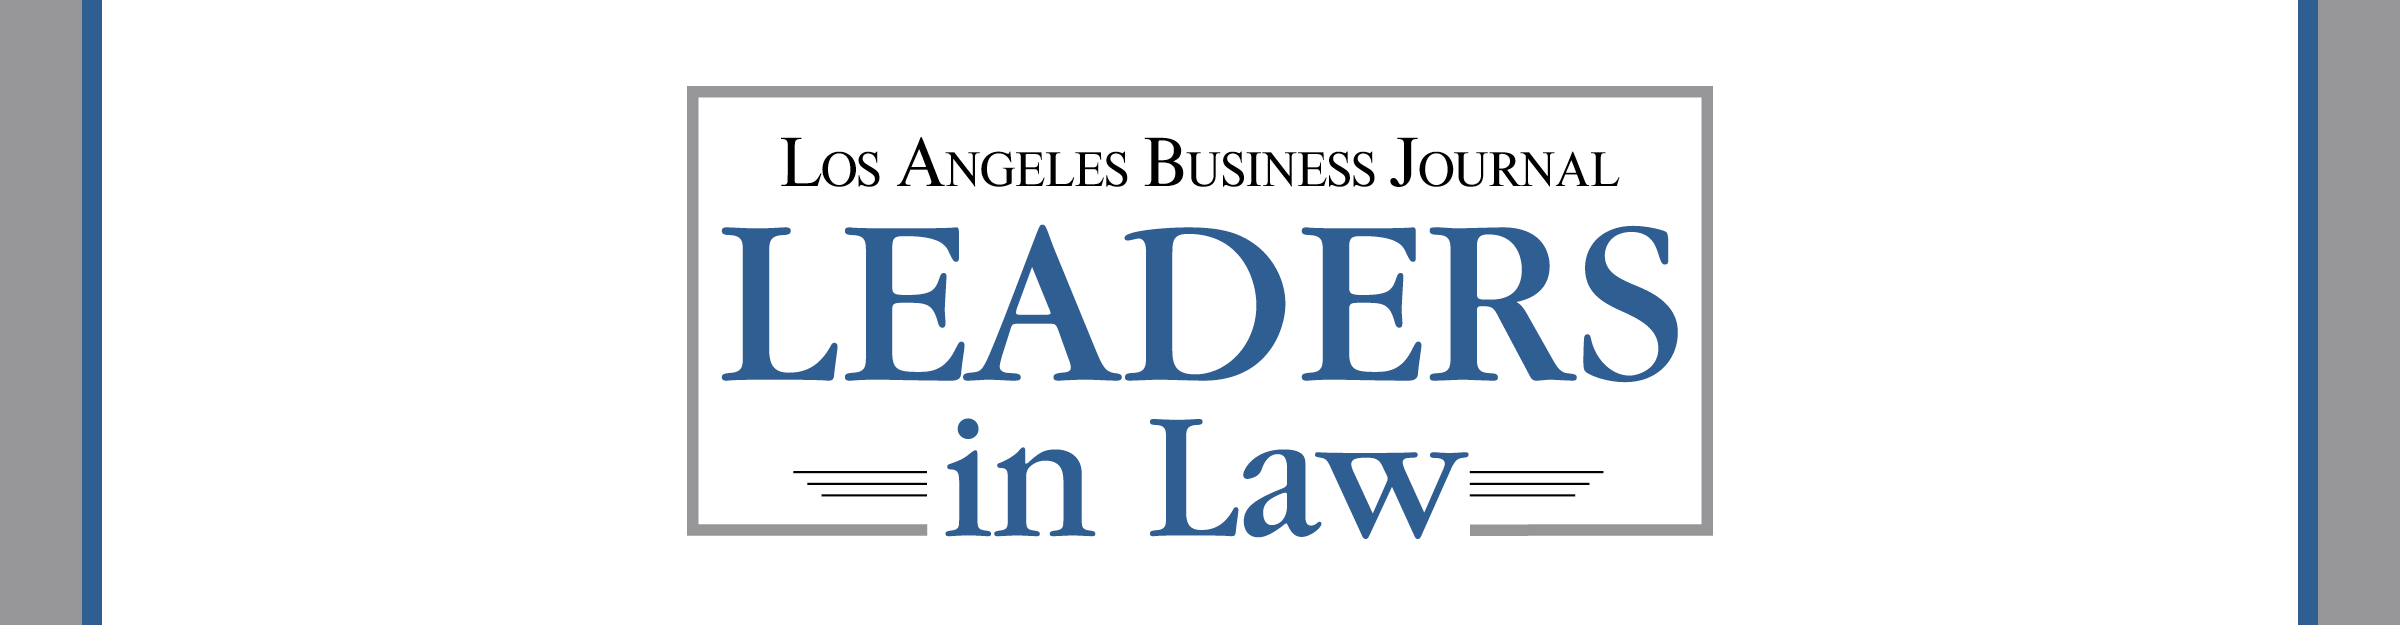 Los Angeles Business Journal Leaders in Law Event Banner